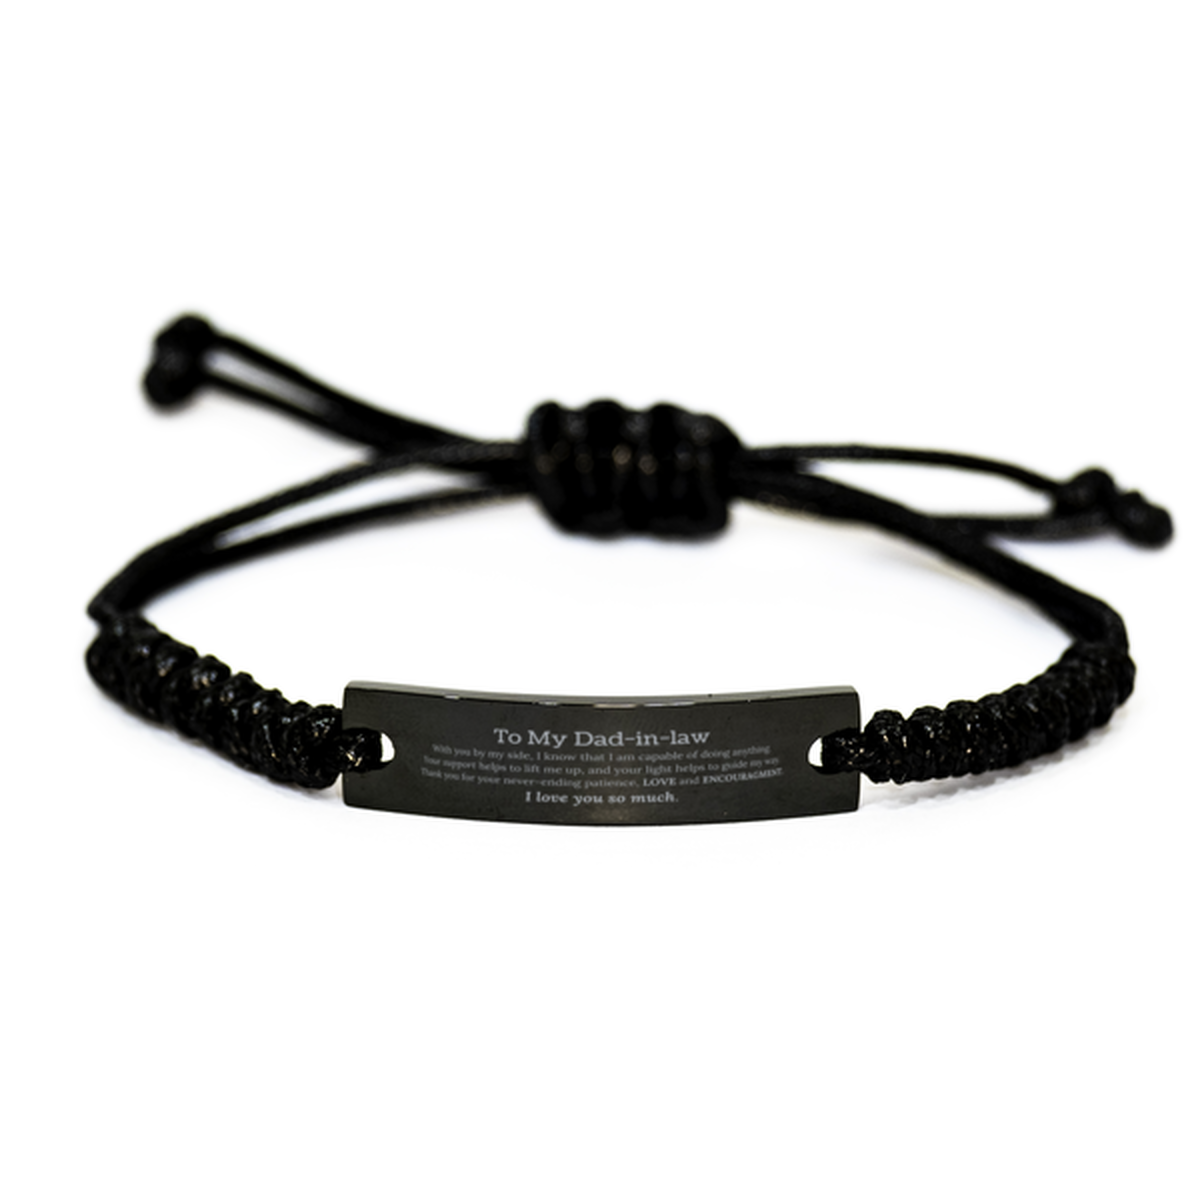 Appreciation Dad-in-law Black Rope Bracelet Gifts, To My Dad-in-law Birthday Christmas Wedding Keepsake Gifts for Dad-in-law With you by my side, I know that I am capable of doing anything. I love you so much